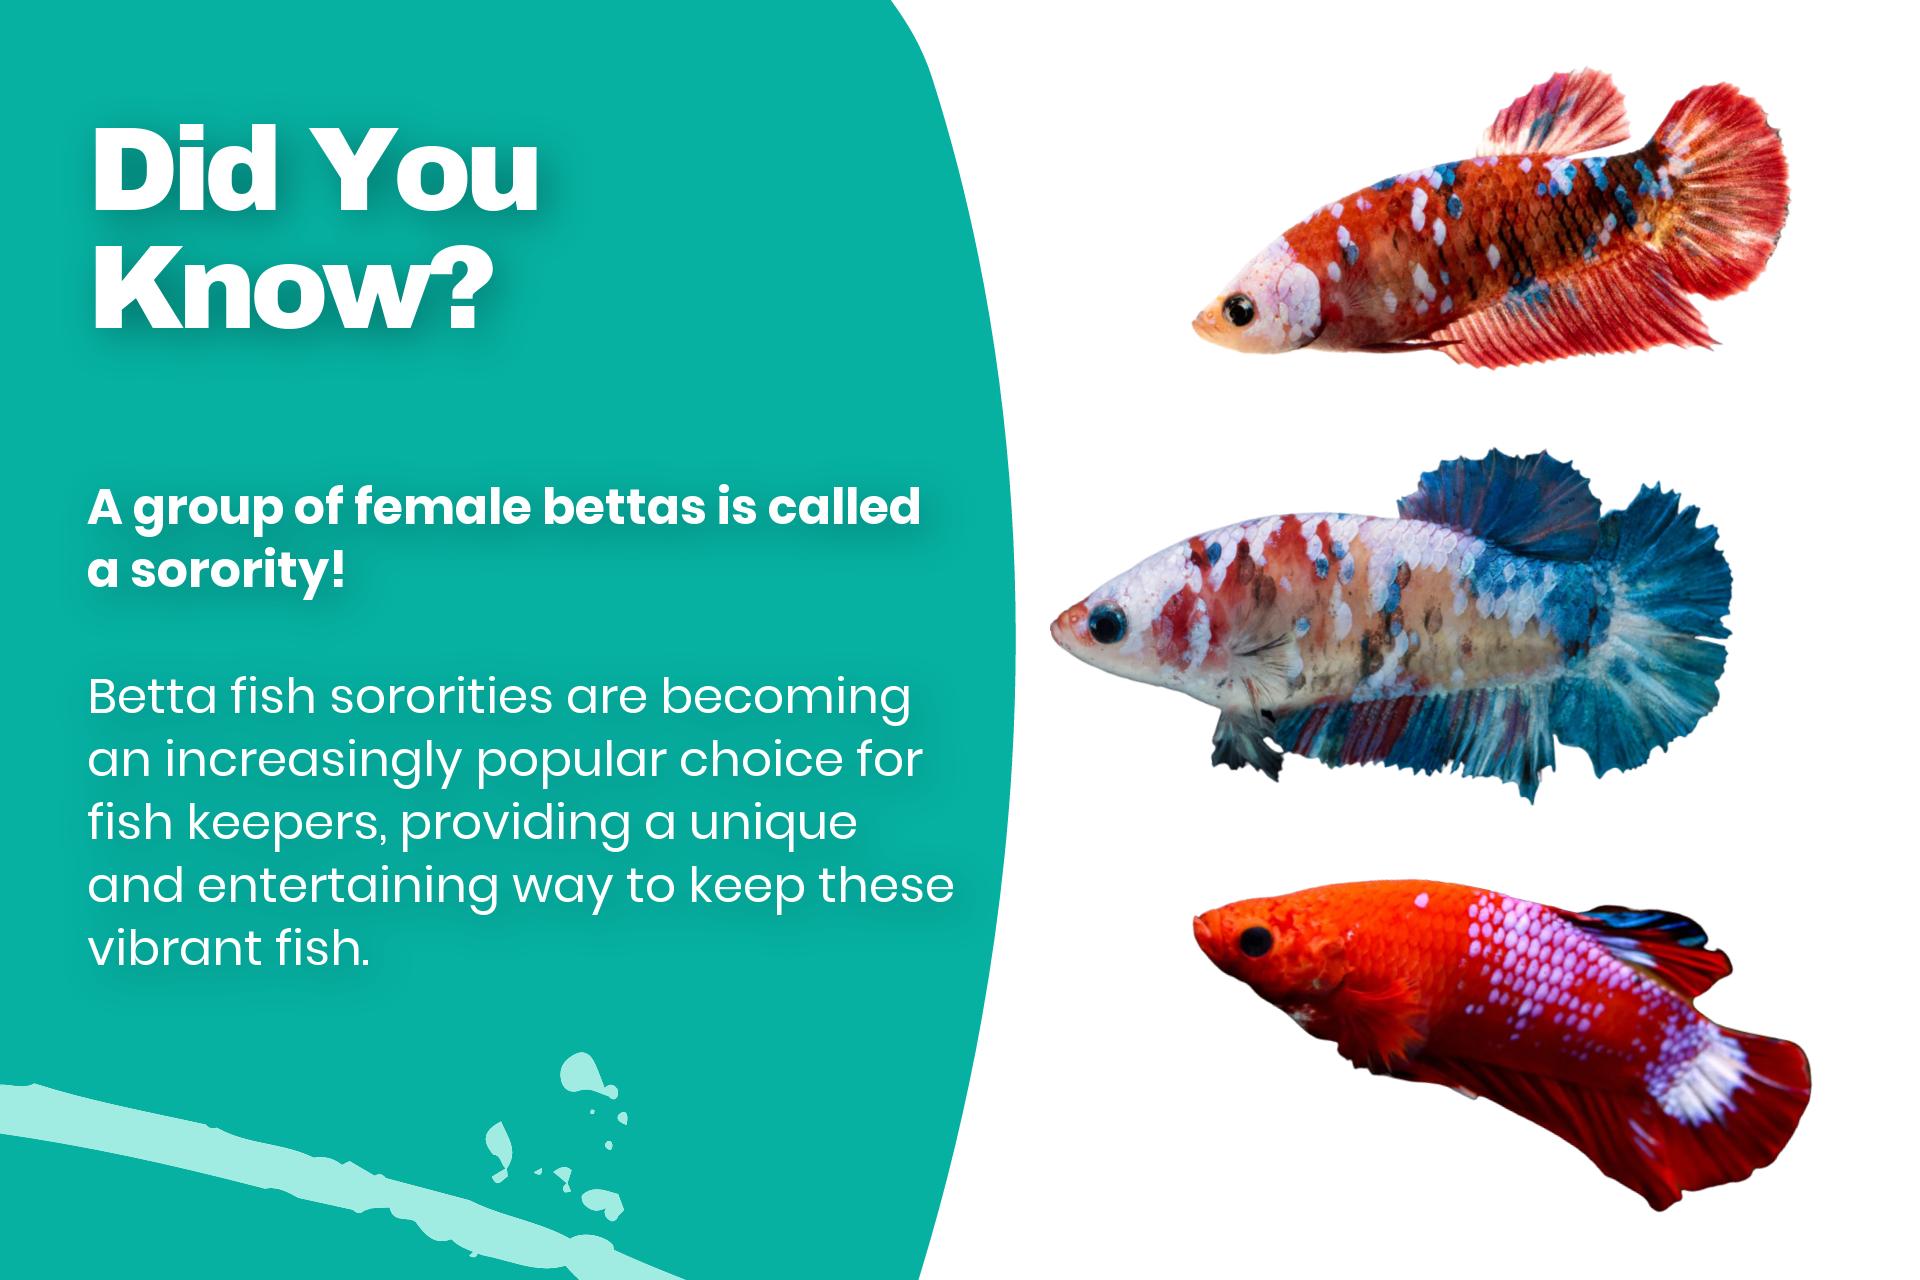 A group of female bettas is called a sorority